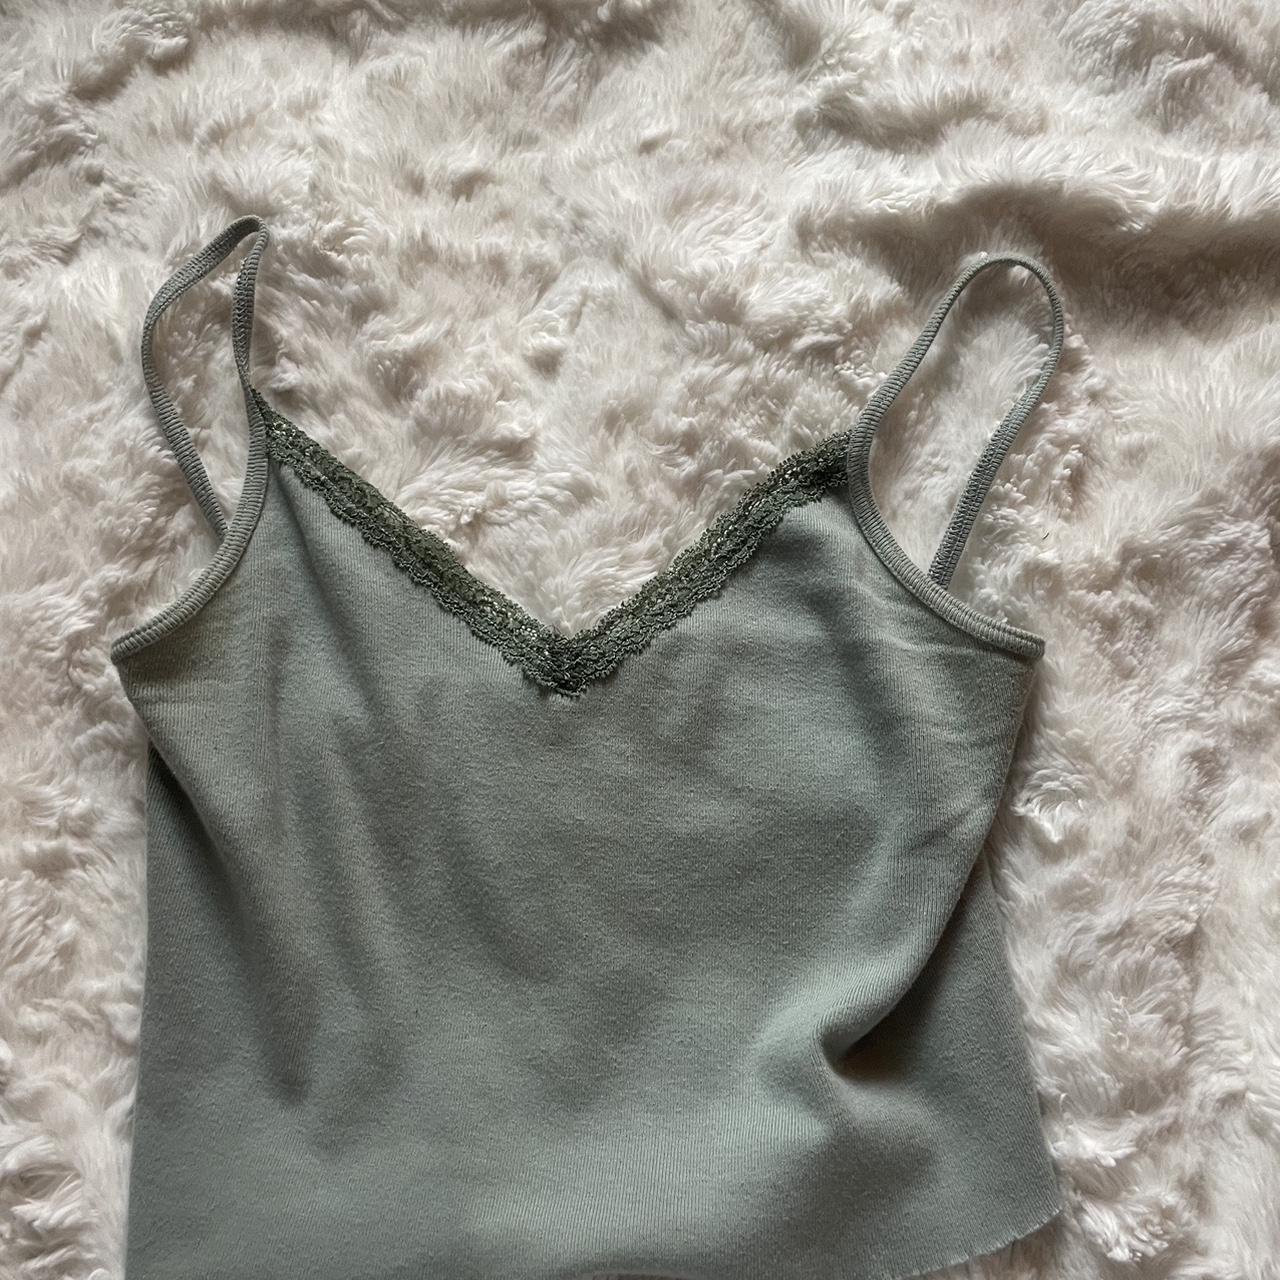 Nicolette Lace Tank from Brandy Melville on 21 Buttons